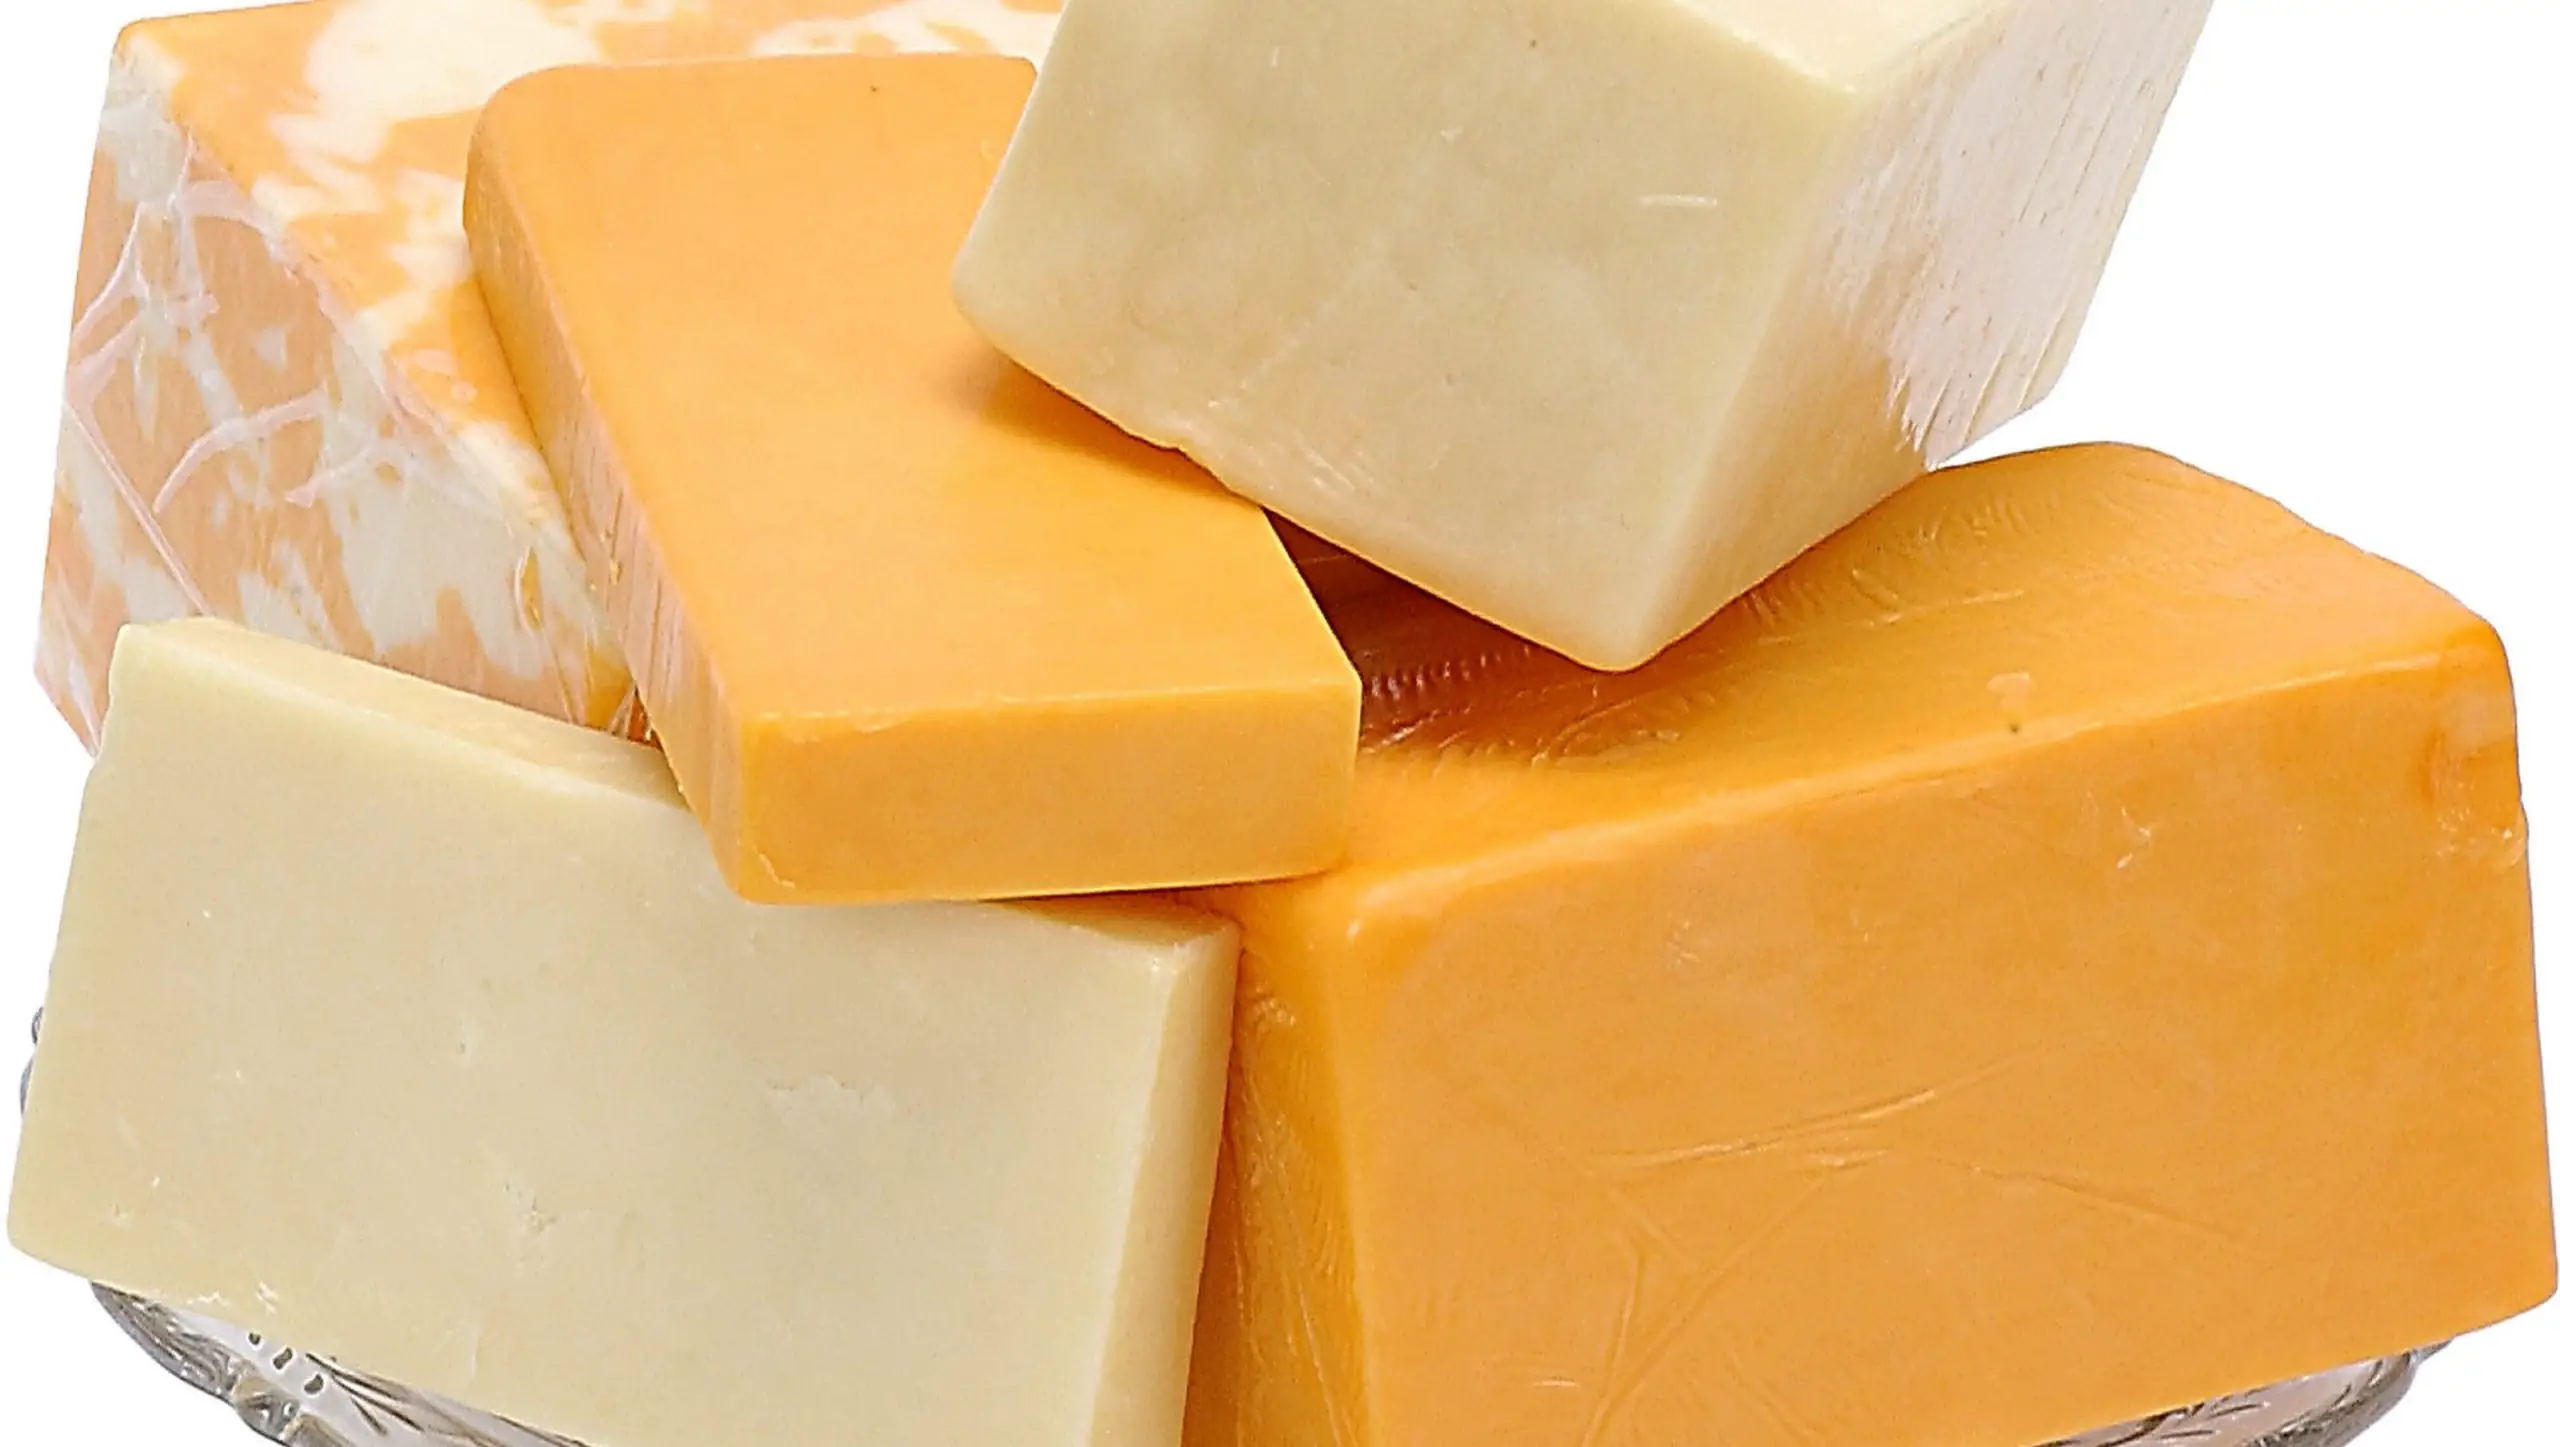 Feds to purchase 11 million pounds of surplus cheese